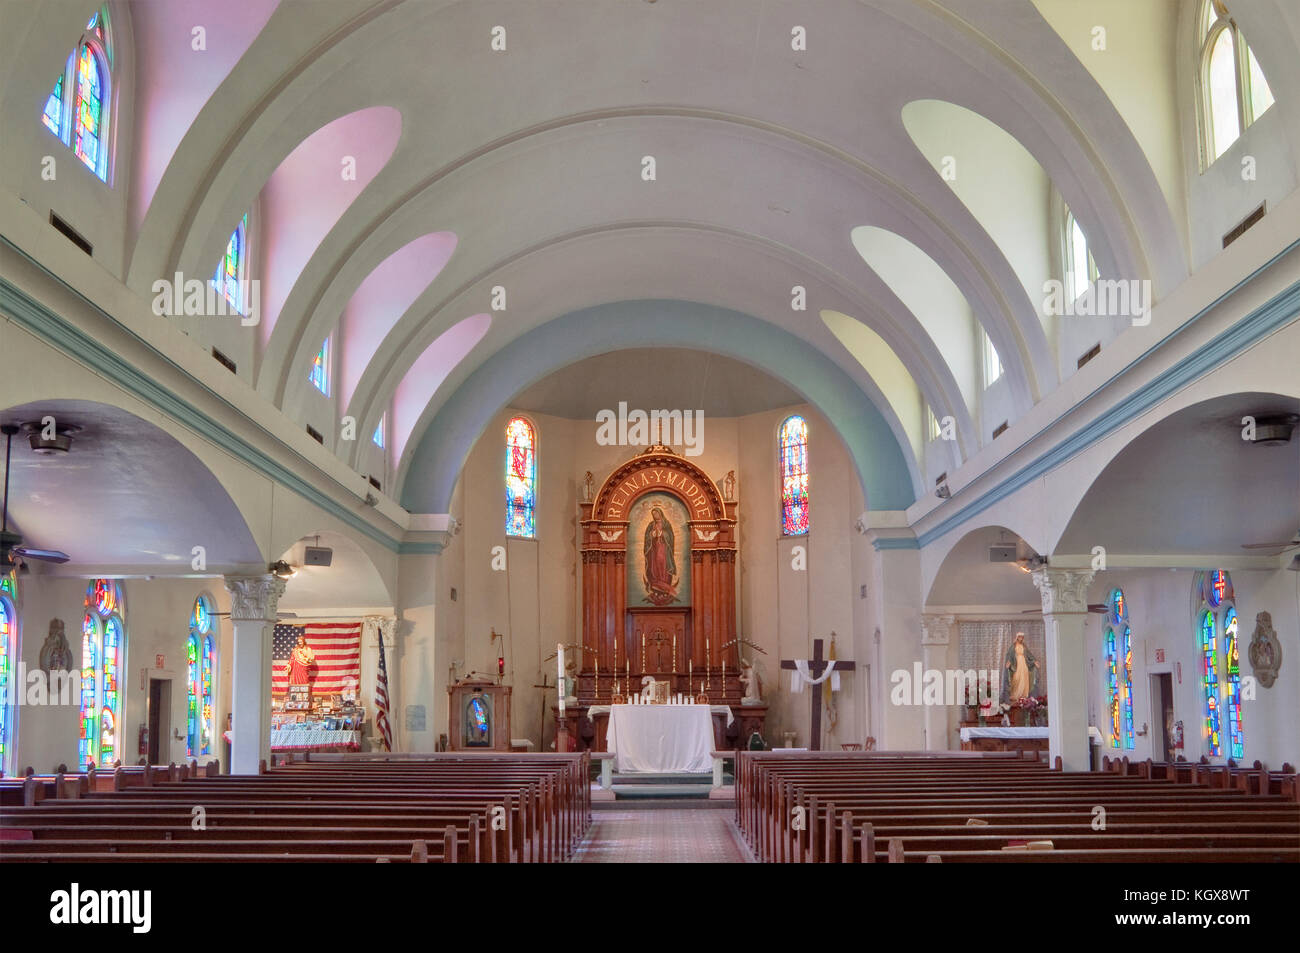 Interior of Our Lady of Guadalupe Catholic Church in Mission, Rio Grande Valley, Texas, USA Stock Photo